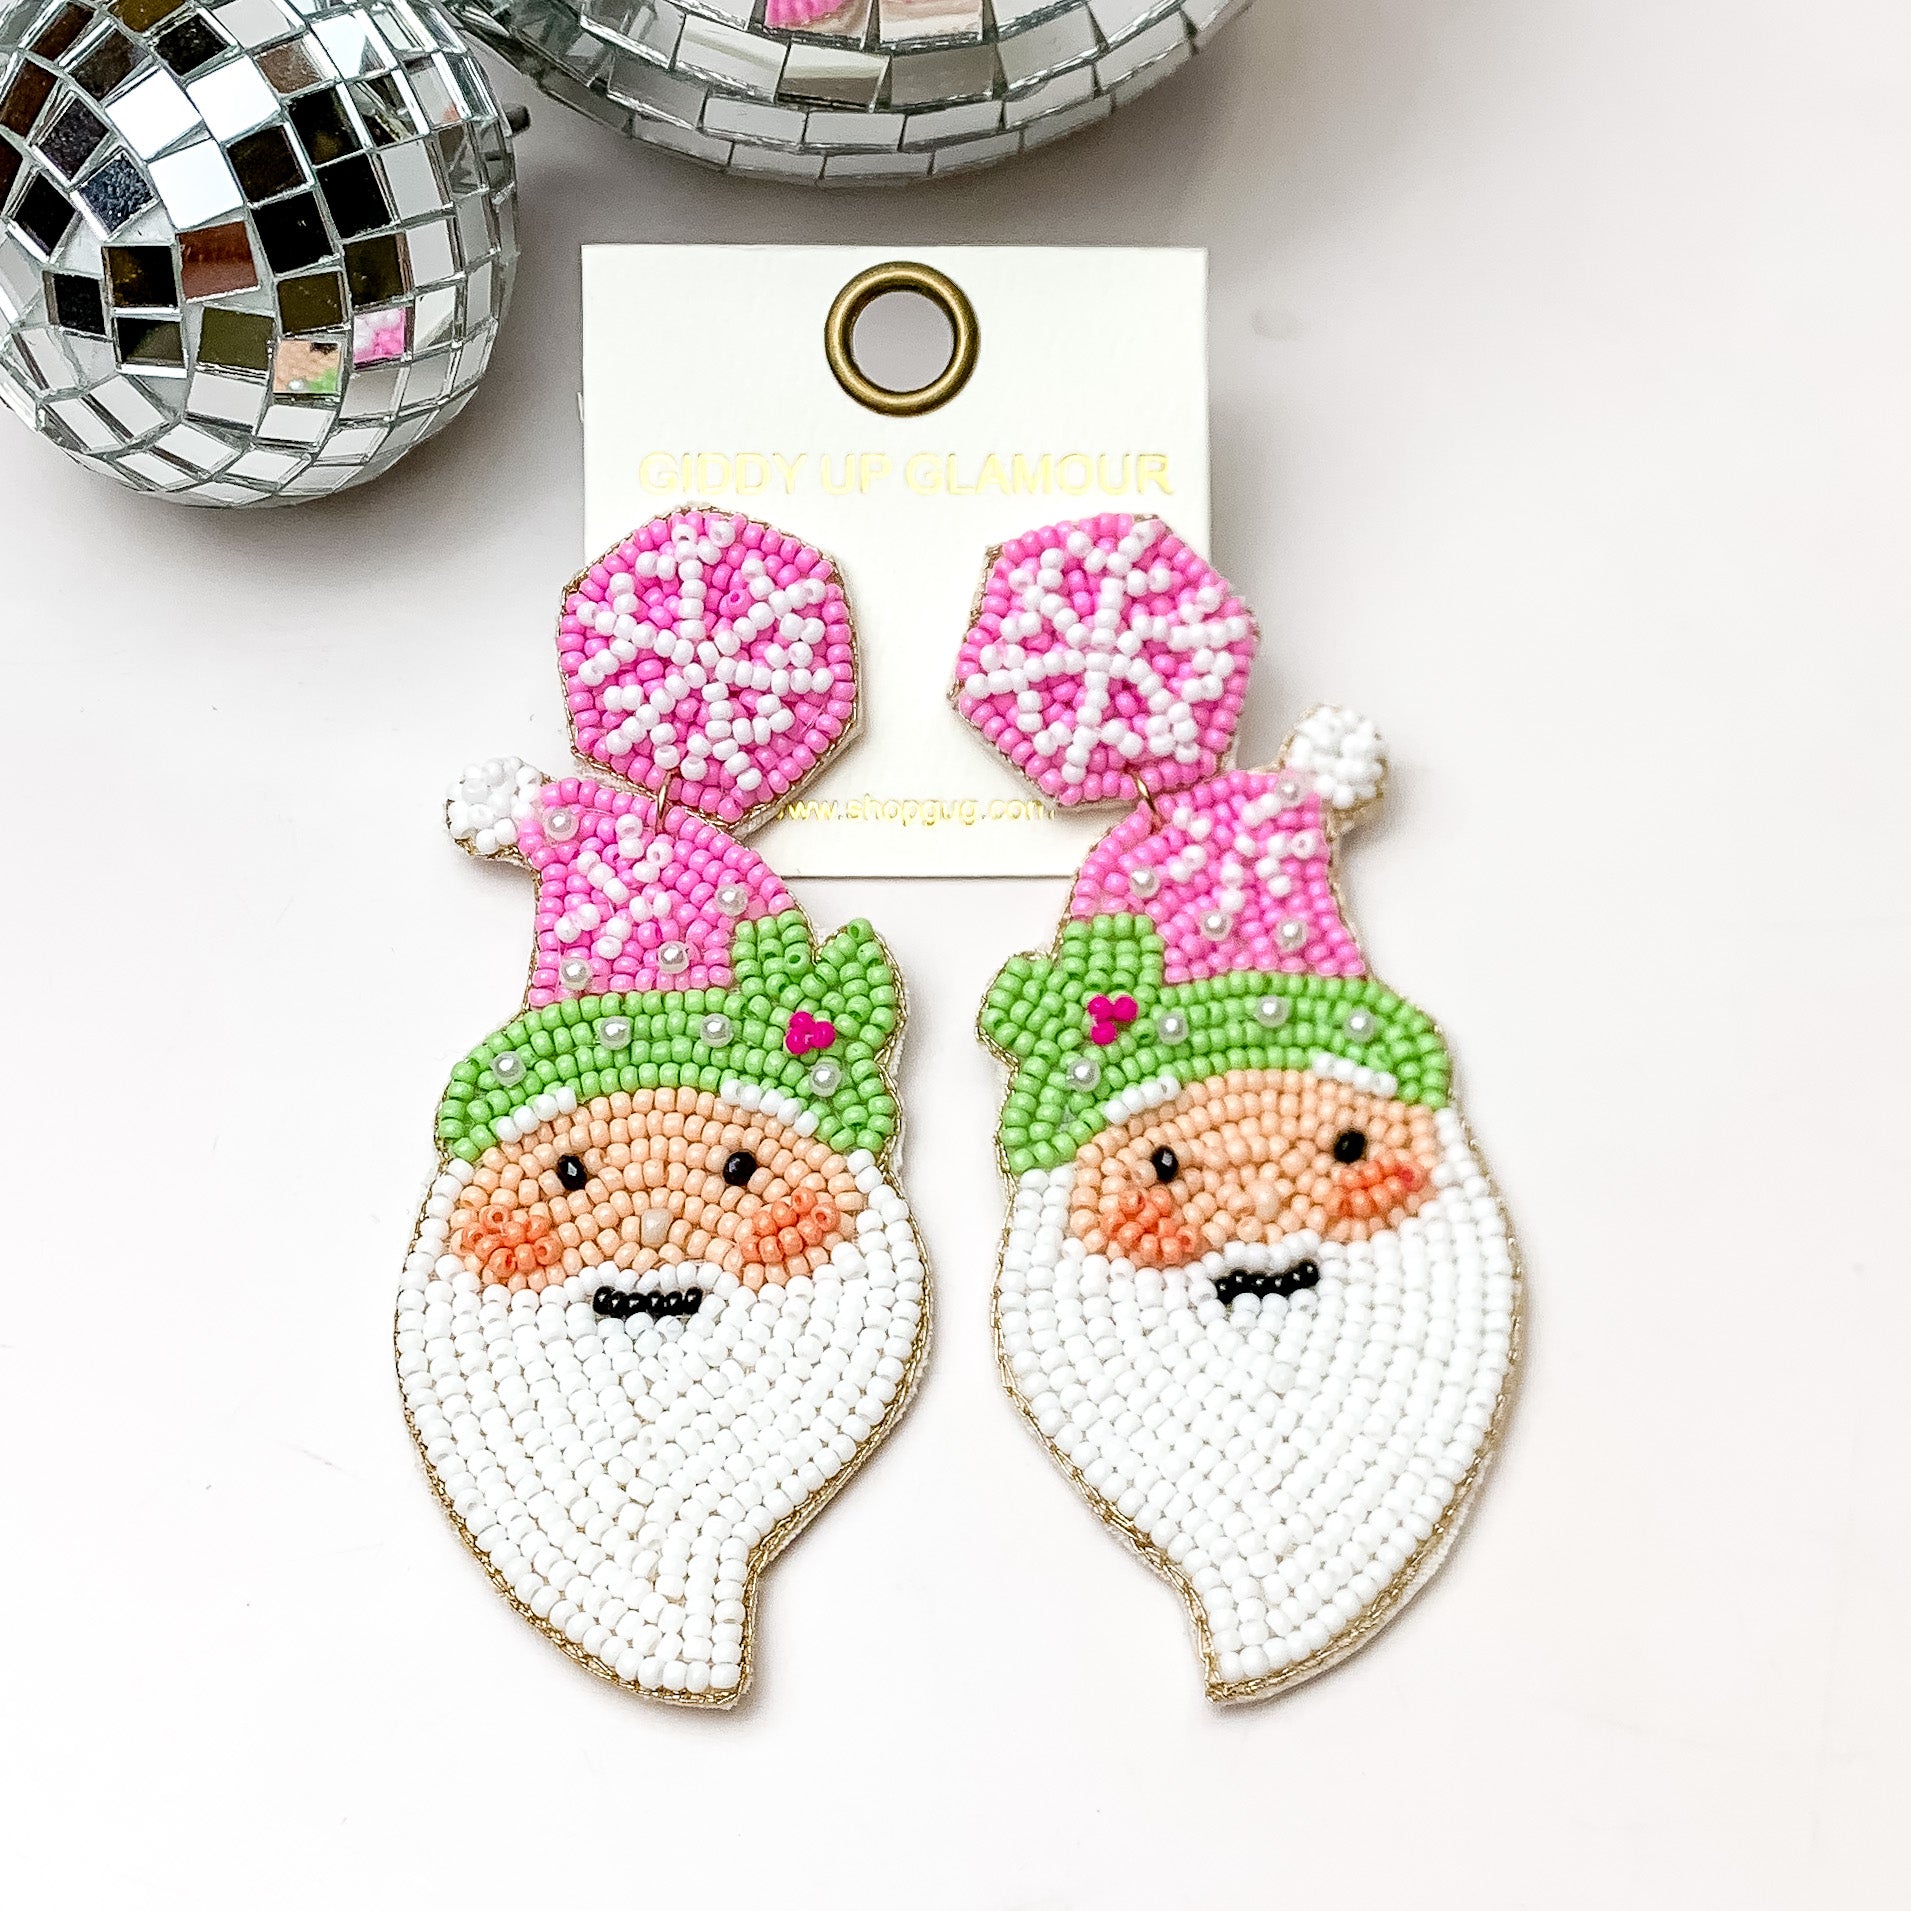 Beaded Santa Earrings with Pink and Green Santa Hat - Giddy Up Glamour Boutique